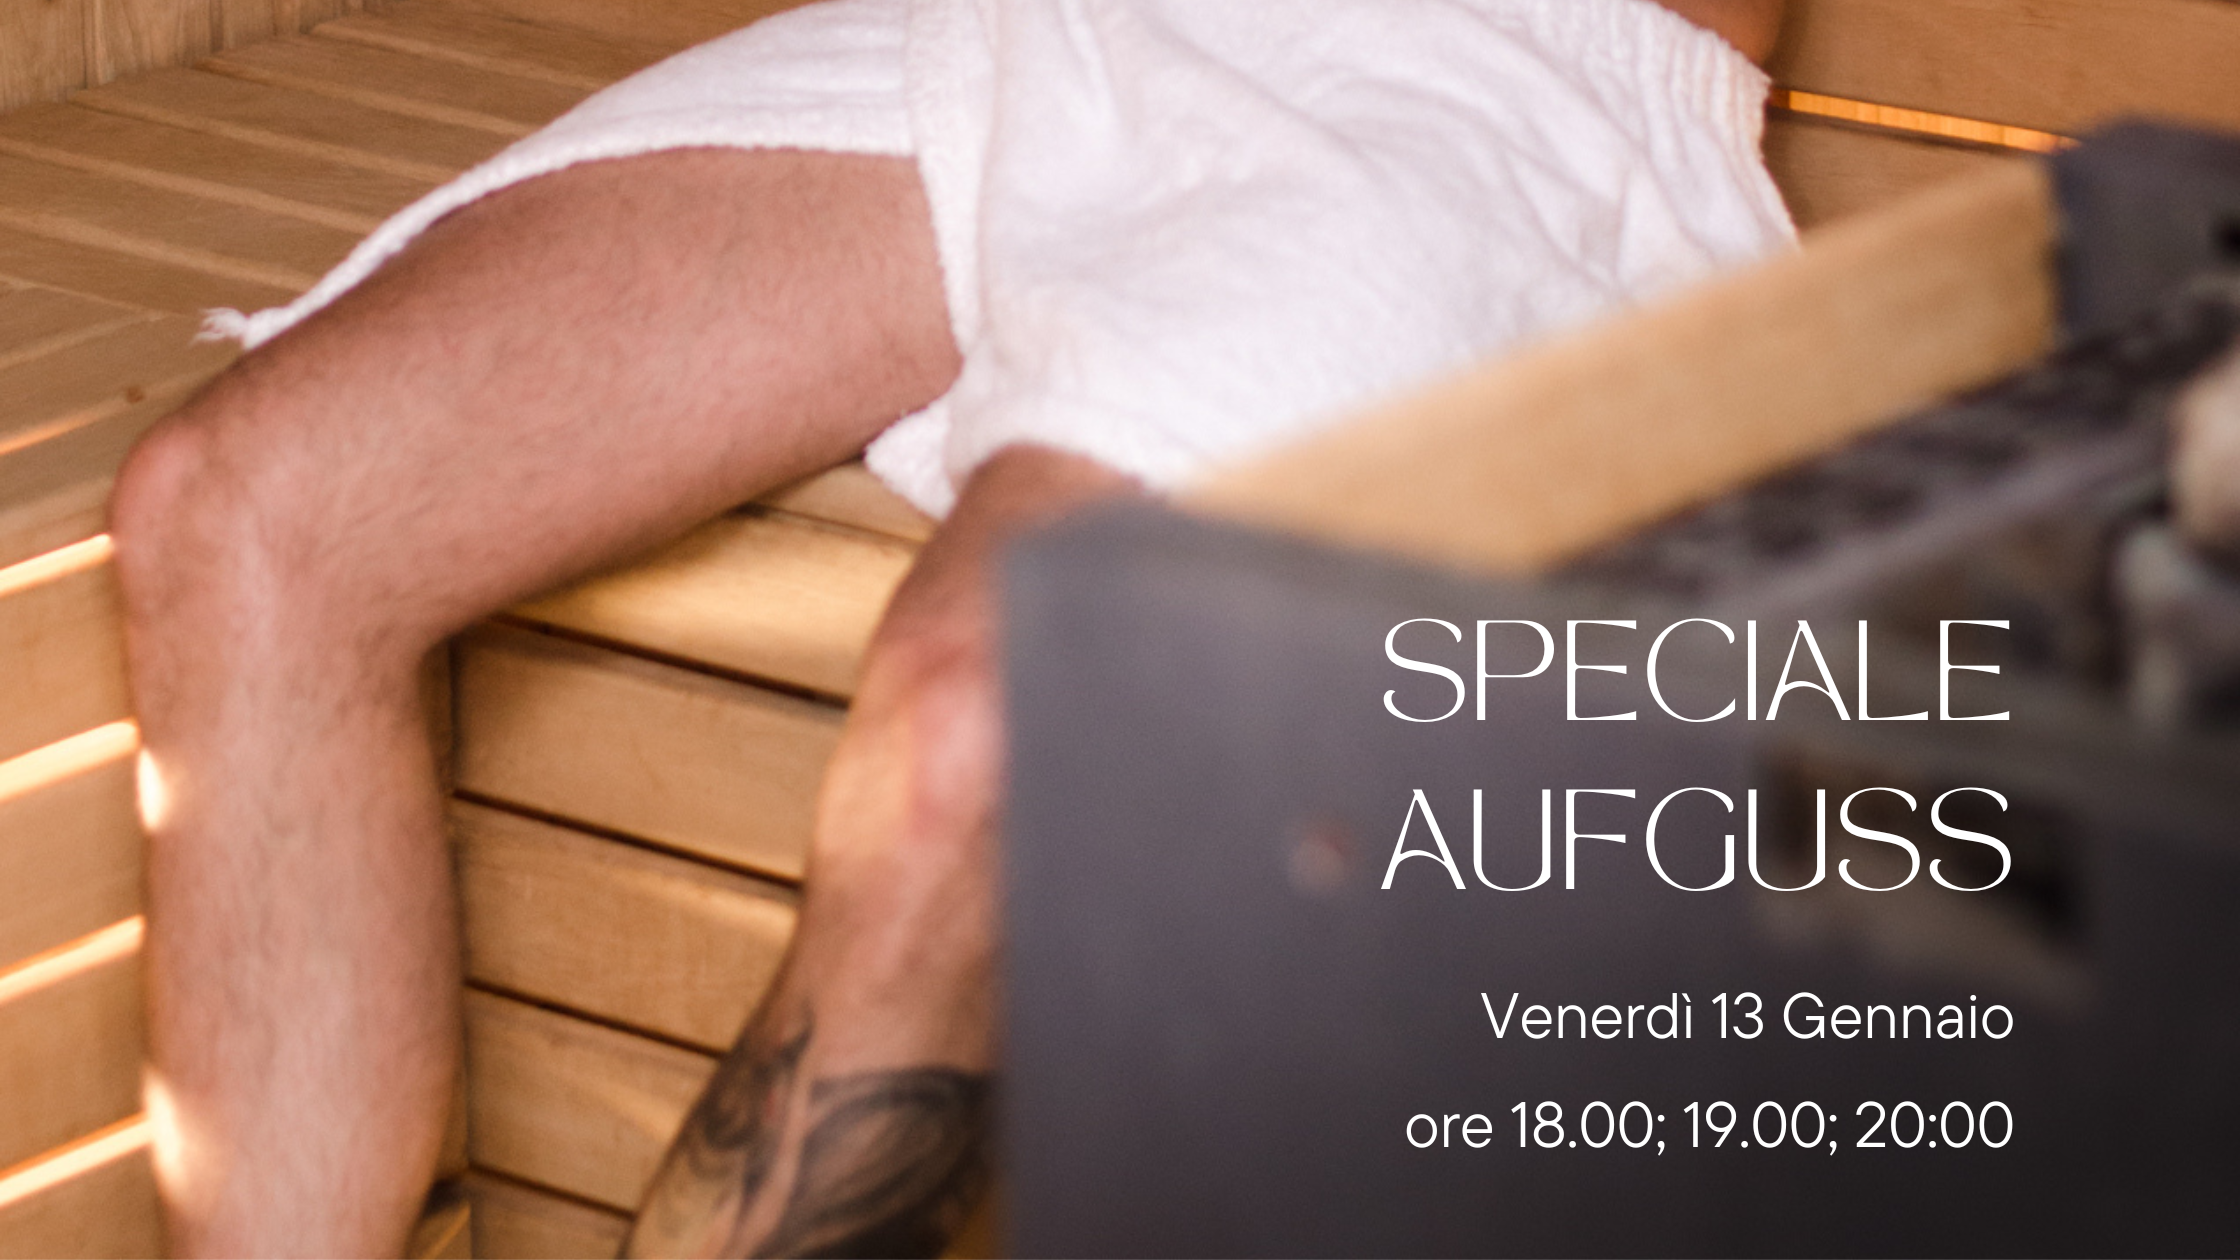 Aufguss speciale!